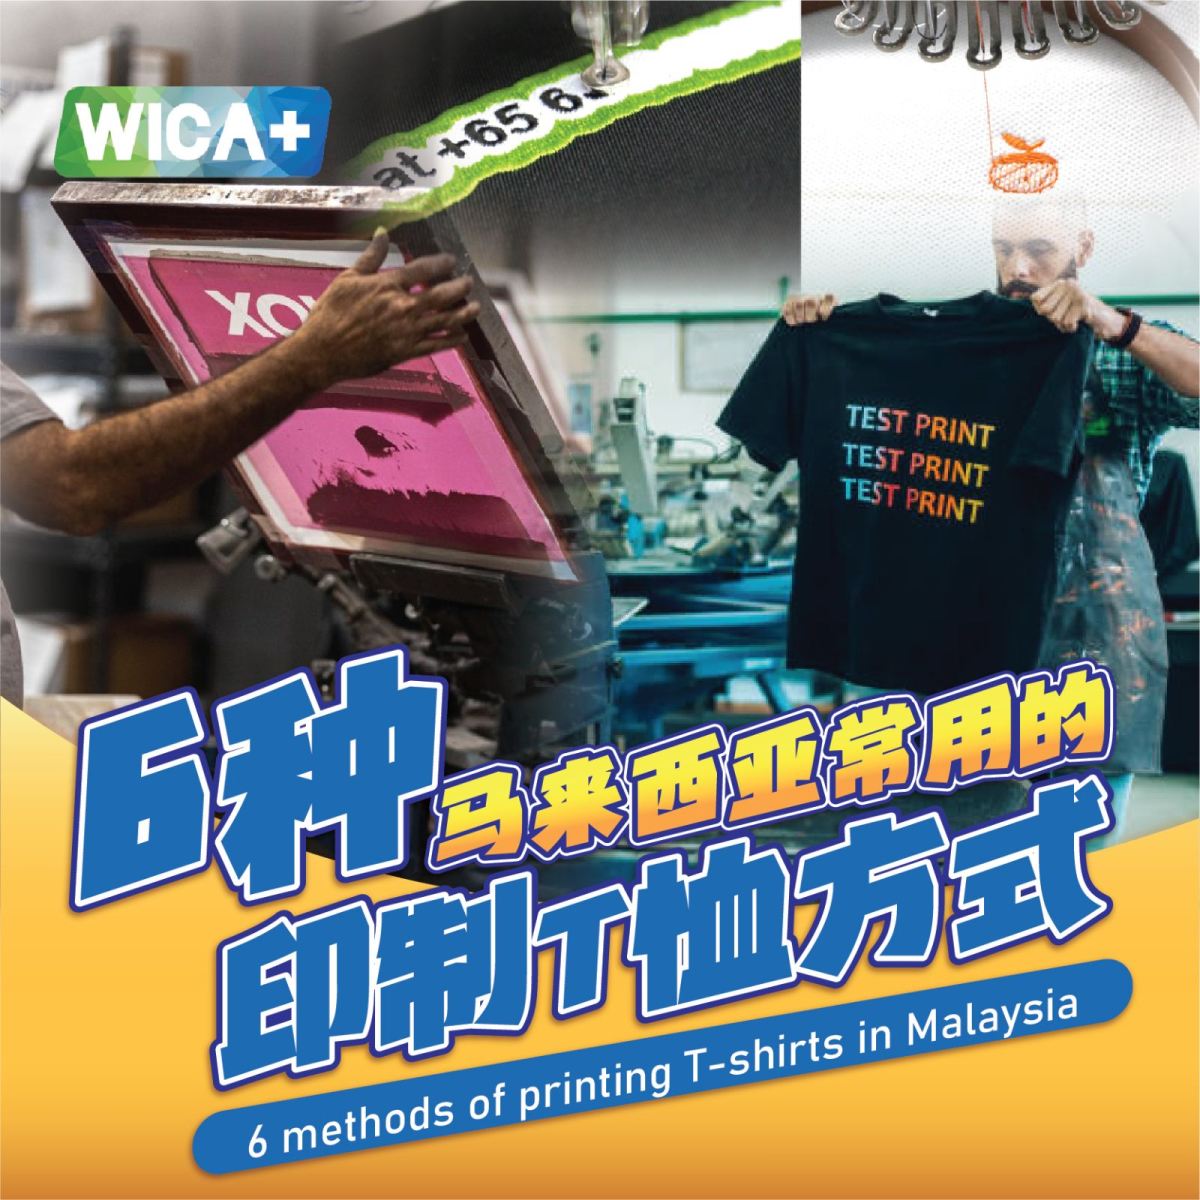 6 commonly used ways to print T-shirts in Malaysia